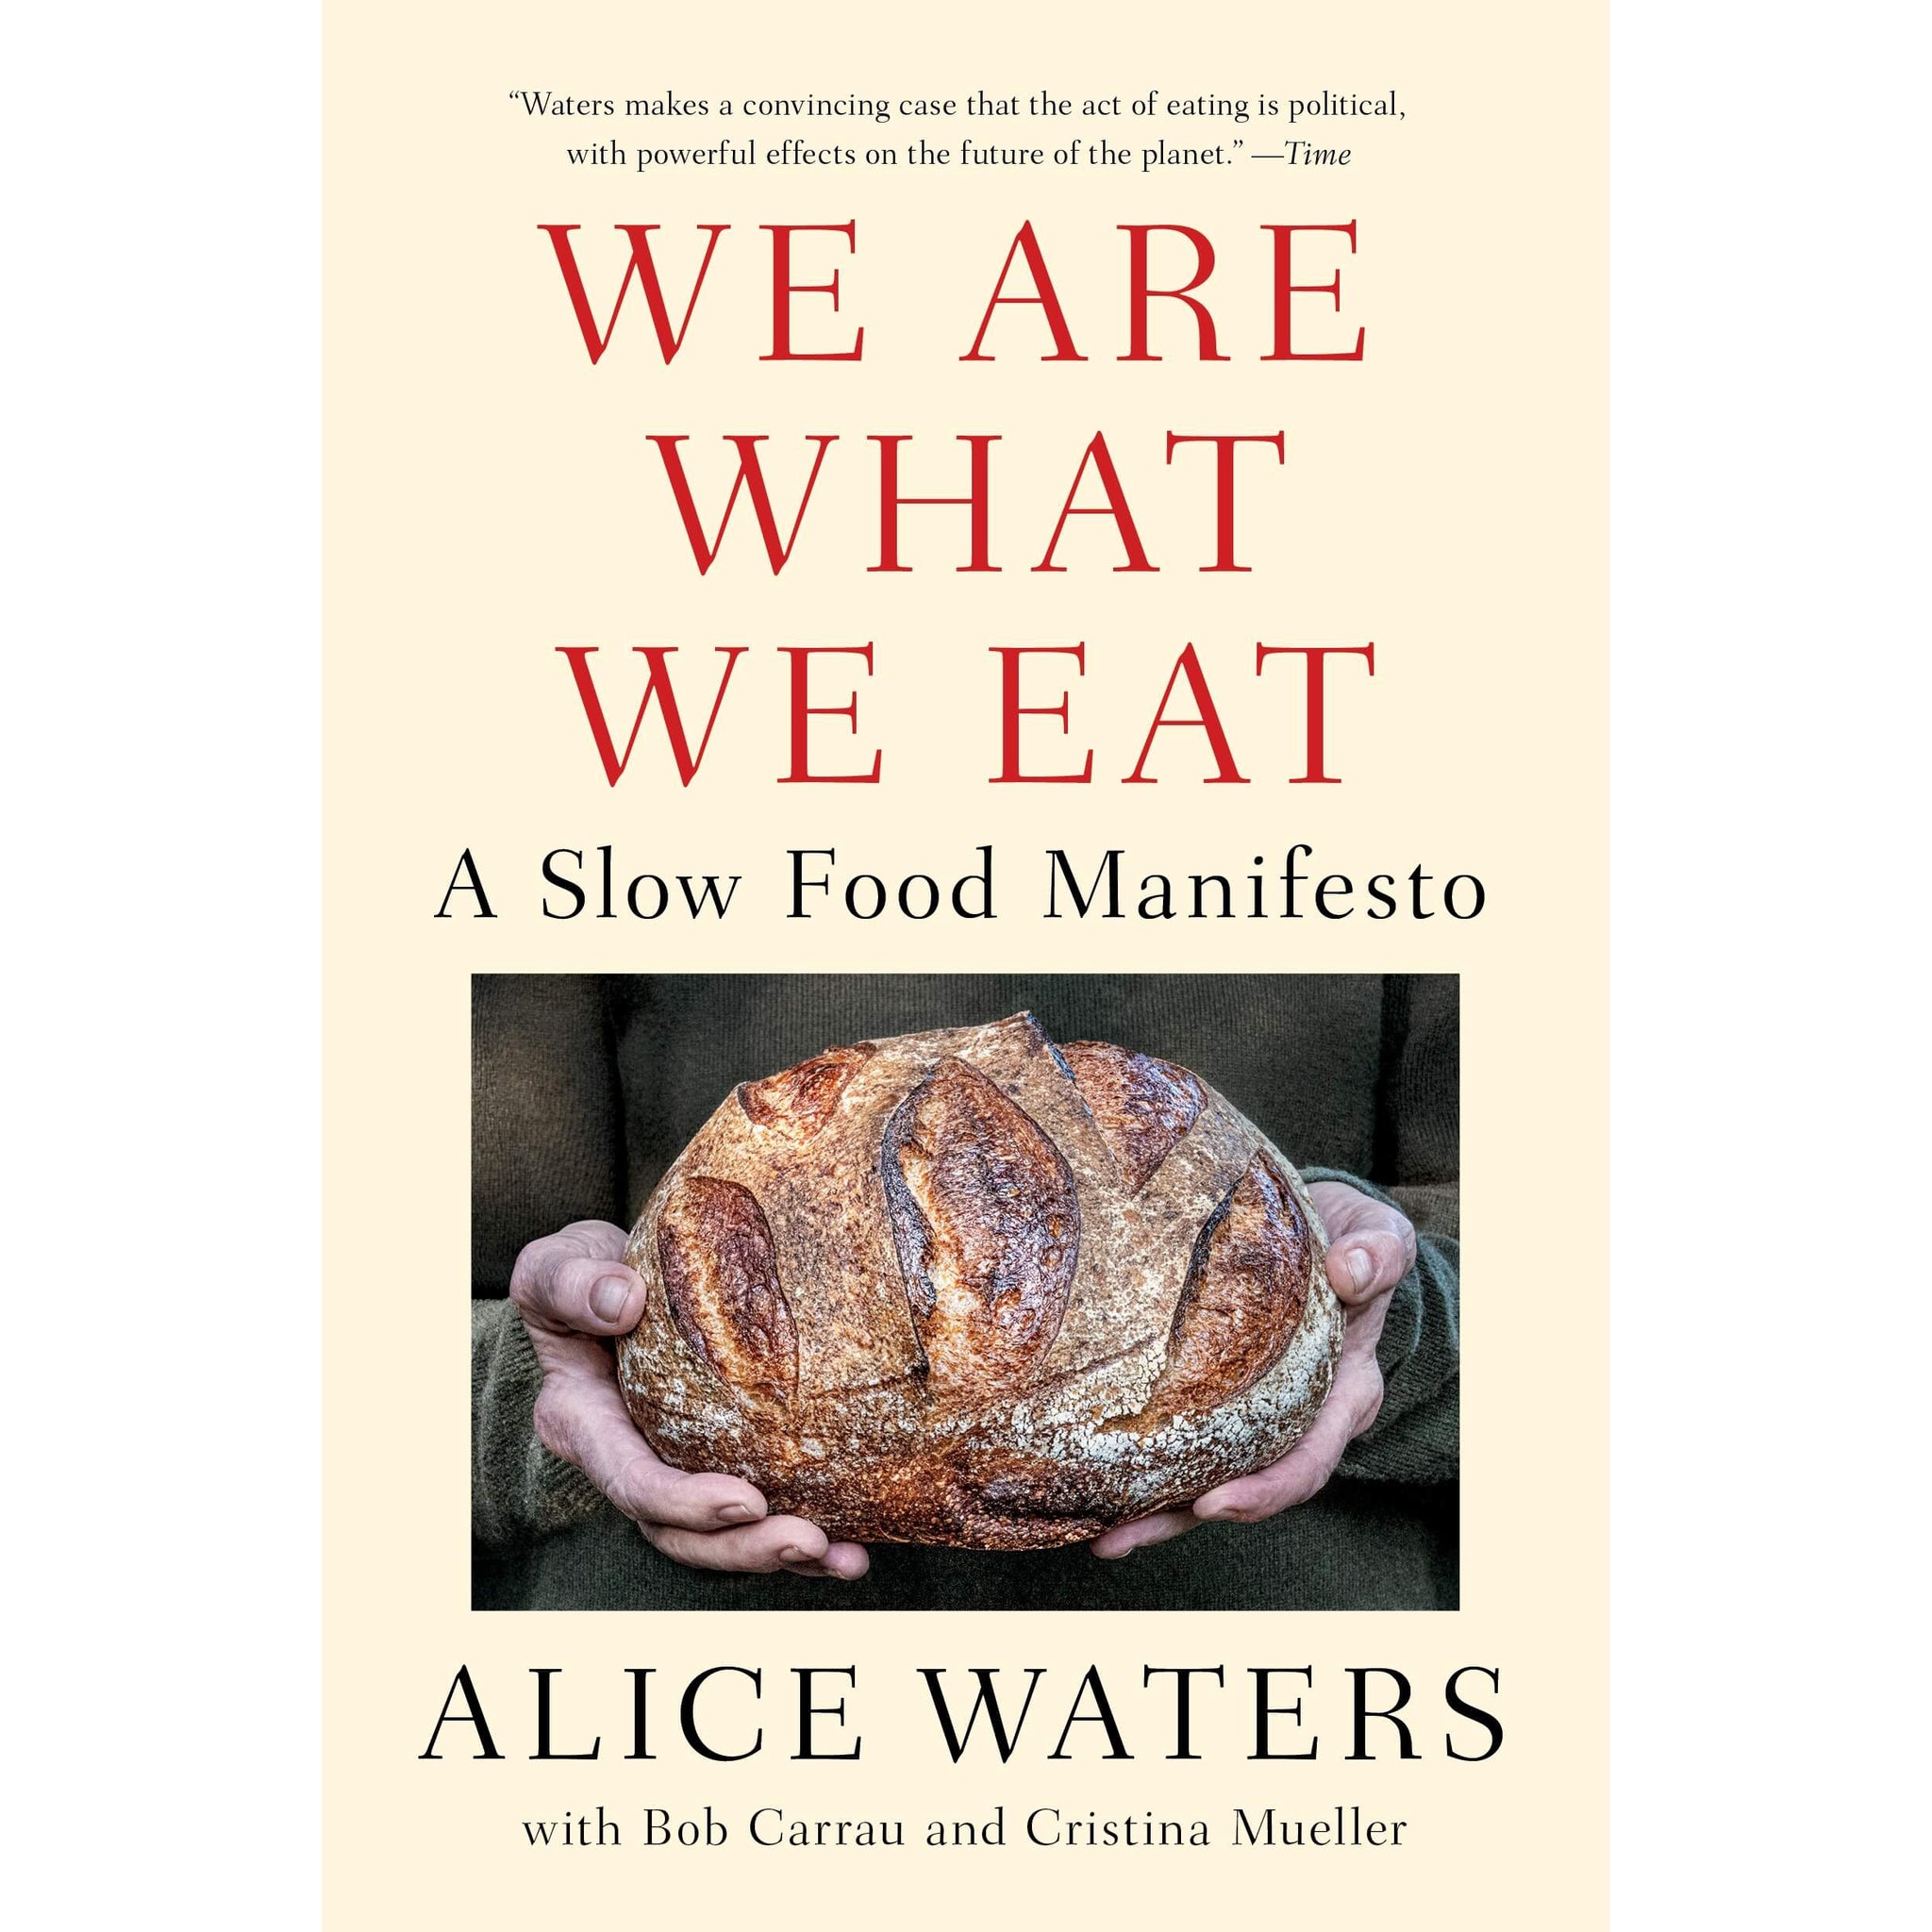 Alice Waters: We Are What We Eat